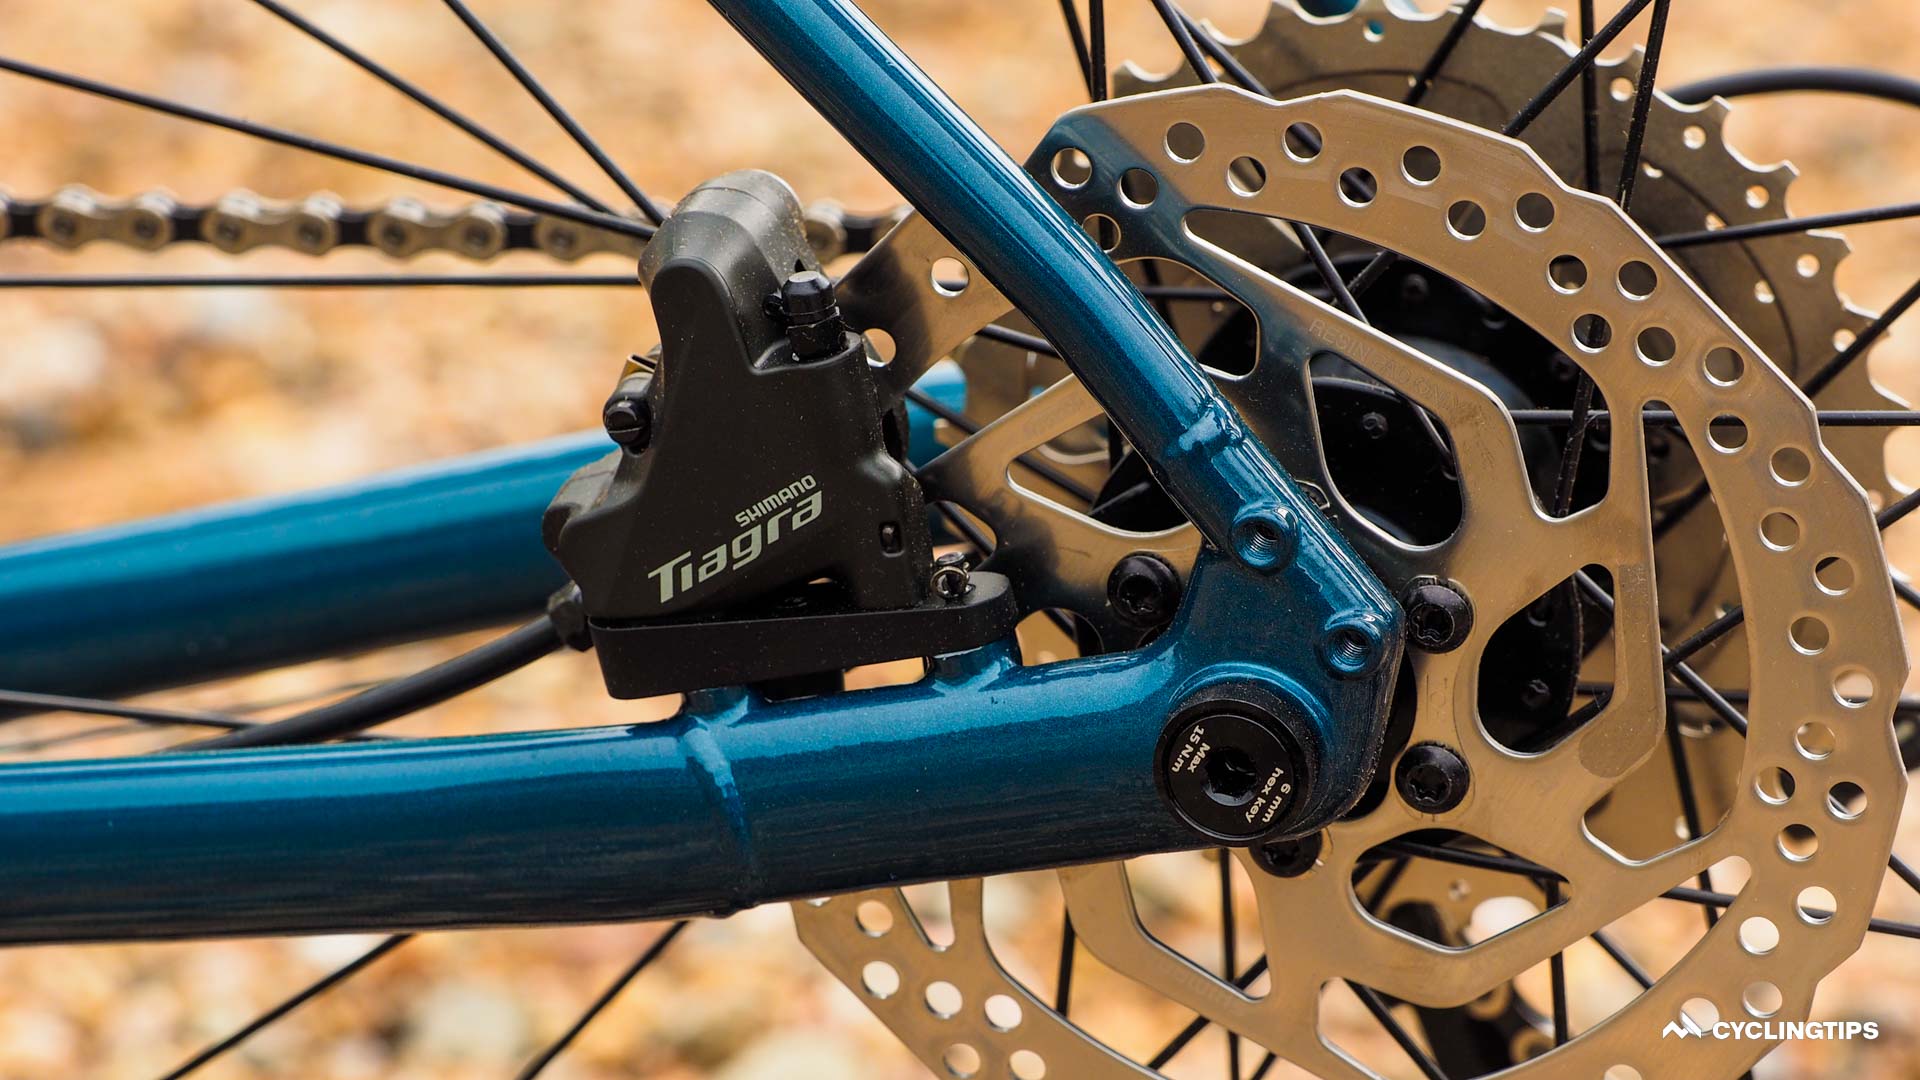 Do you really need hydraulic disc brakes or will mechanical ones